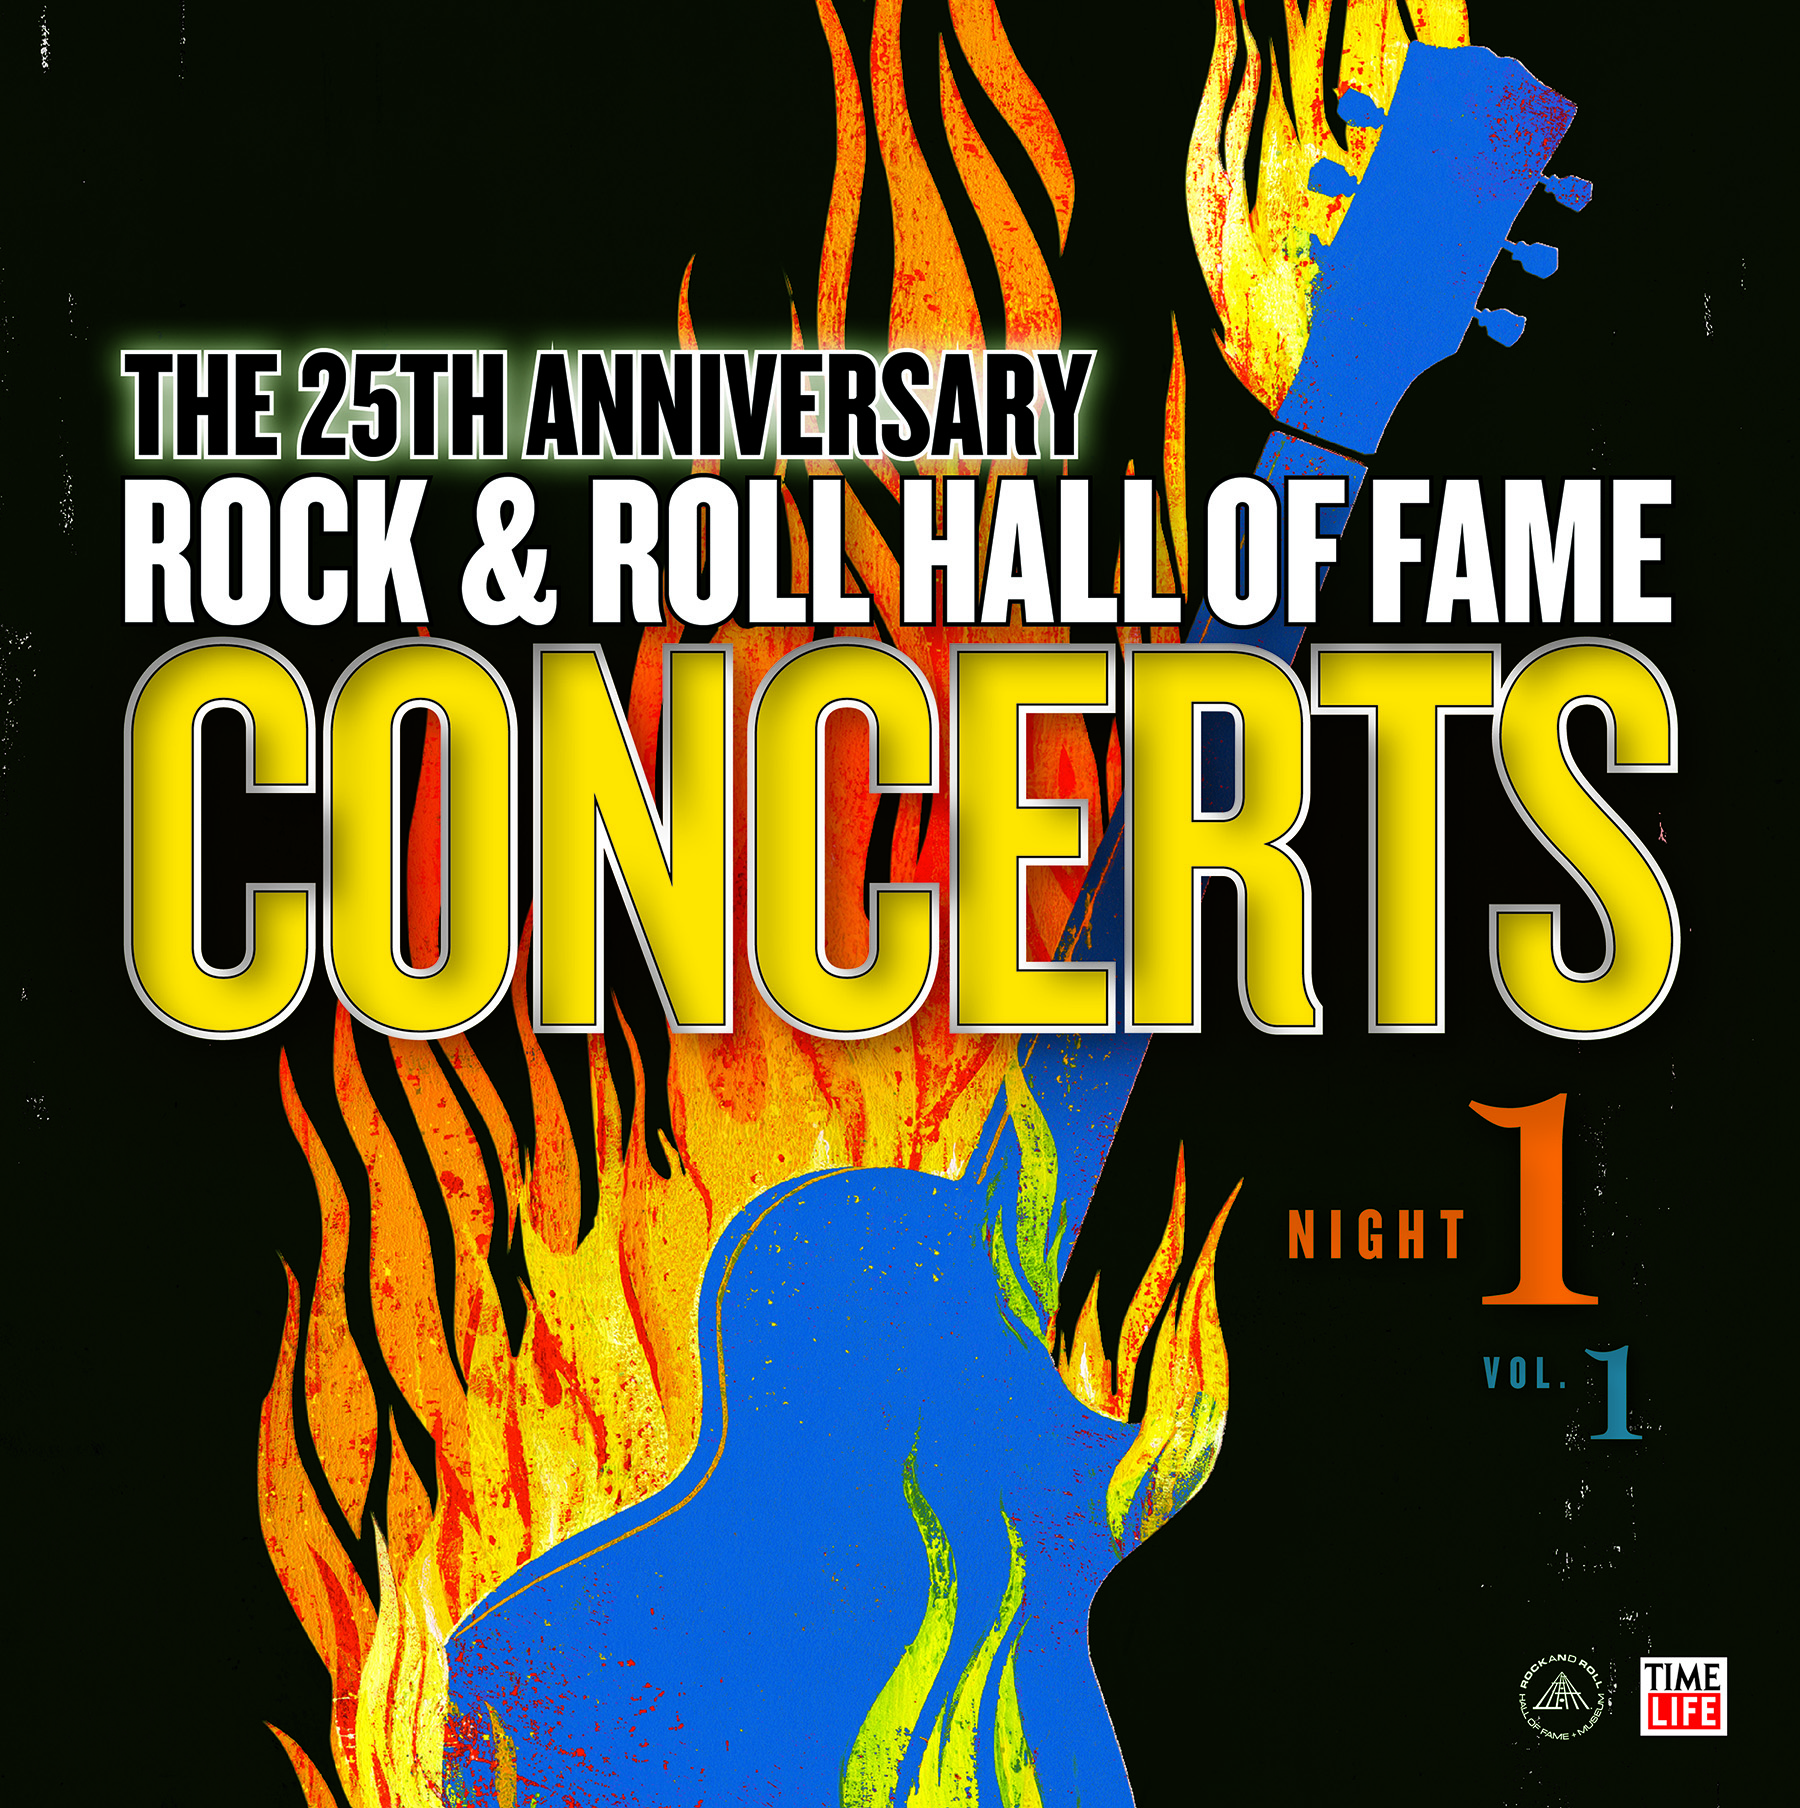 25th Anniversary Rock and Roll Hall of Fame Concerts Night 1 Vol. 1